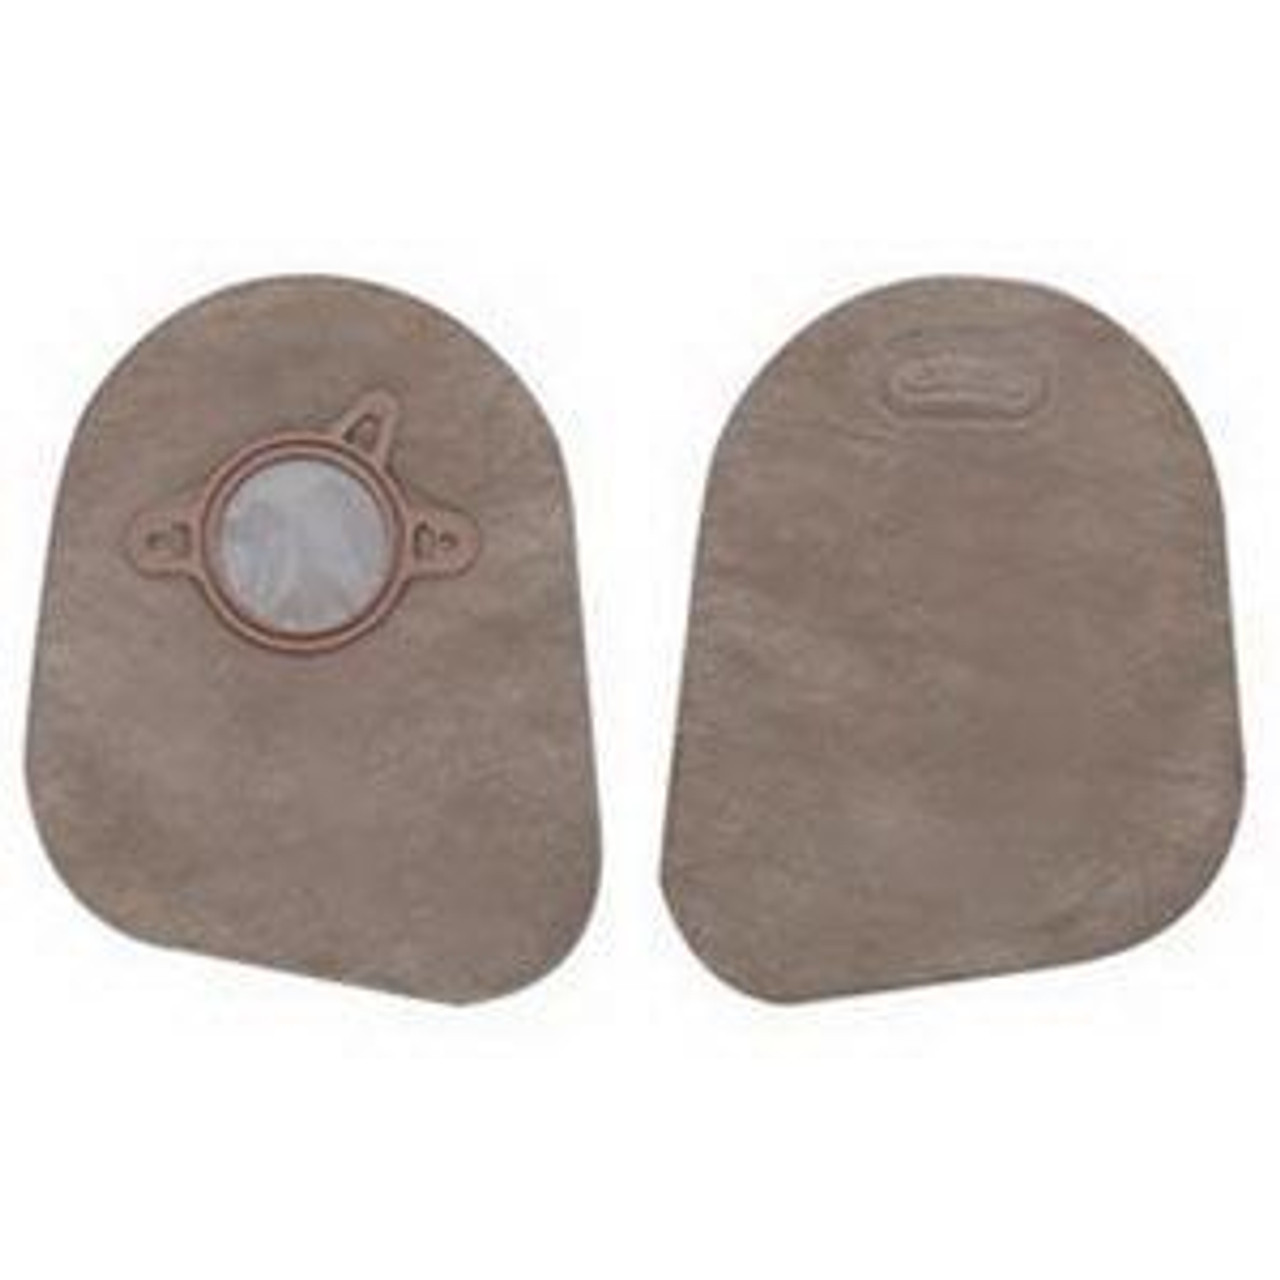 NEW IMAGE CLOSED MINI Pouch, FILTER, 2 3/4" FLANGE, BEIGE BX/60 (HOL-18394) (Hollister 18394)